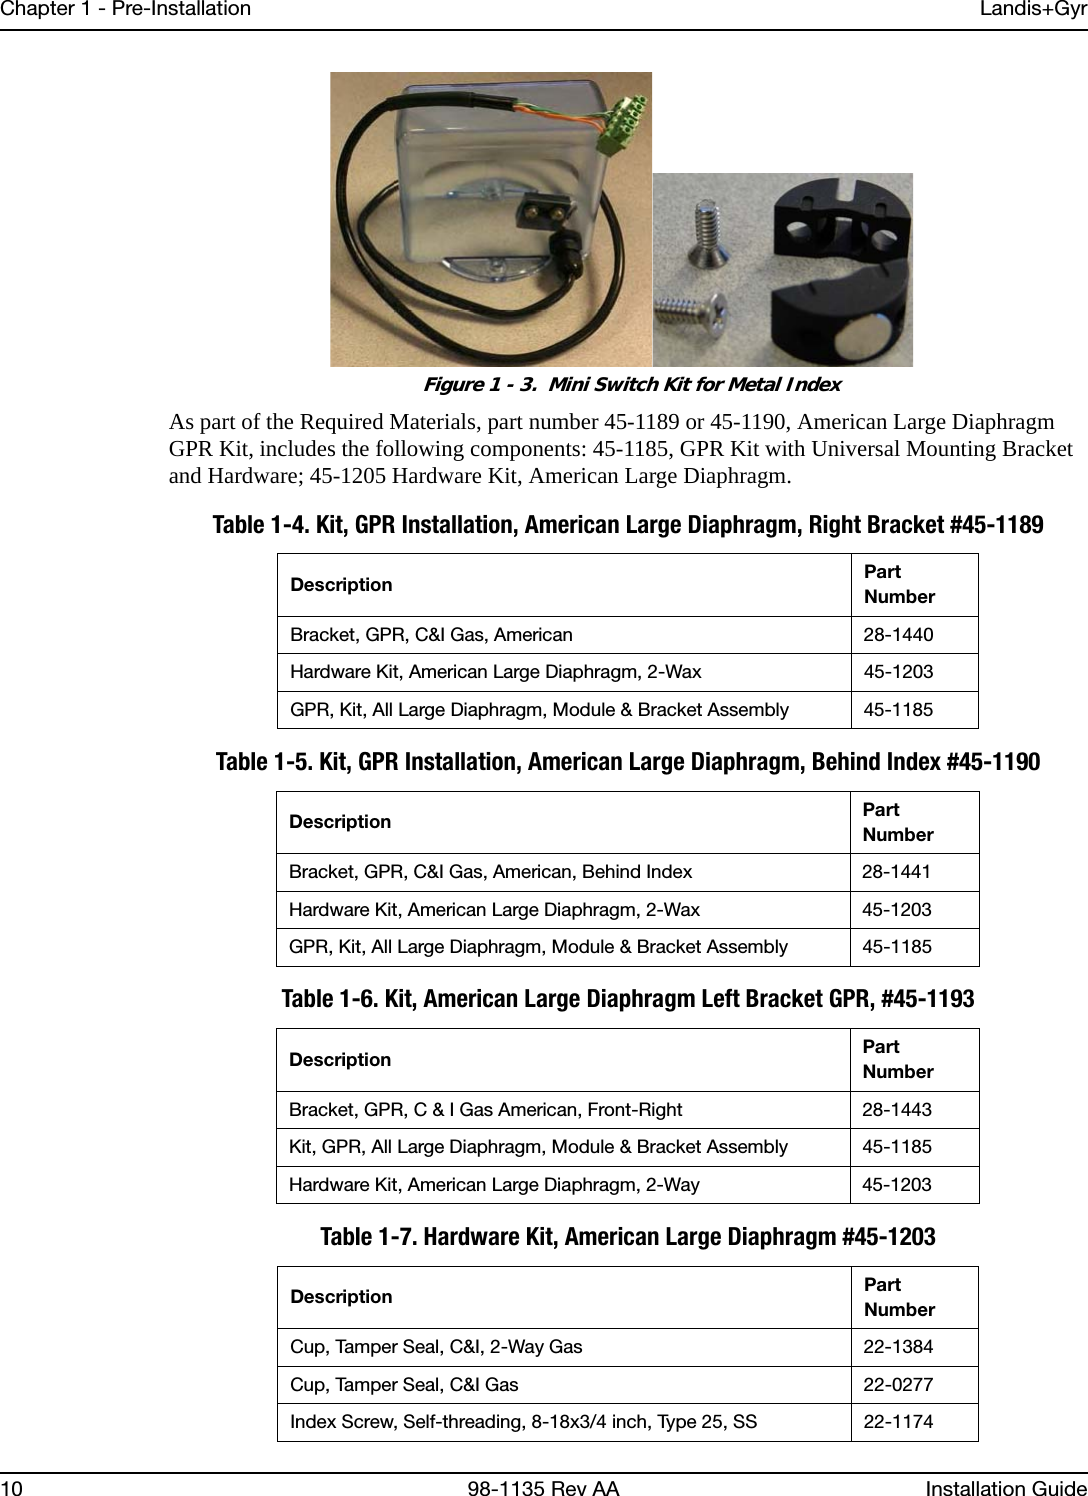 Chapter 1 - Pre-Installation Landis+Gyr10 98-1135 Rev AA Installation Guide Figure 1 - 3.  Mini Switch Kit for Metal IndexAs part of the Required Materials, part number 45-1189 or 45-1190, American Large Diaphragm GPR Kit, includes the following components: 45-1185, GPR Kit with Universal Mounting Bracket and Hardware; 45-1205 Hardware Kit, American Large Diaphragm.Table 1-4. Kit, GPR Installation, American Large Diaphragm, Right Bracket #45-1189Description Part NumberBracket, GPR, C&amp;I Gas, American 28-1440Hardware Kit, American Large Diaphragm, 2-Wax 45-1203GPR, Kit, All Large Diaphragm, Module &amp; Bracket Assembly 45-1185Table 1-5. Kit, GPR Installation, American Large Diaphragm, Behind Index #45-1190Description Part NumberBracket, GPR, C&amp;I Gas, American, Behind Index 28-1441Hardware Kit, American Large Diaphragm, 2-Wax 45-1203GPR, Kit, All Large Diaphragm, Module &amp; Bracket Assembly 45-1185Table 1-6. Kit, American Large Diaphragm Left Bracket GPR, #45-1193Description Part NumberBracket, GPR, C &amp; I Gas American, Front-Right 28-1443Kit, GPR, All Large Diaphragm, Module &amp; Bracket Assembly 45-1185Hardware Kit, American Large Diaphragm, 2-Way 45-1203Table 1-7. Hardware Kit, American Large Diaphragm #45-1203Description Part NumberCup, Tamper Seal, C&amp;I, 2-Way Gas 22-1384Cup, Tamper Seal, C&amp;I Gas 22-0277Index Screw, Self-threading, 8-18x3/4 inch, Type 25, SS 22-1174